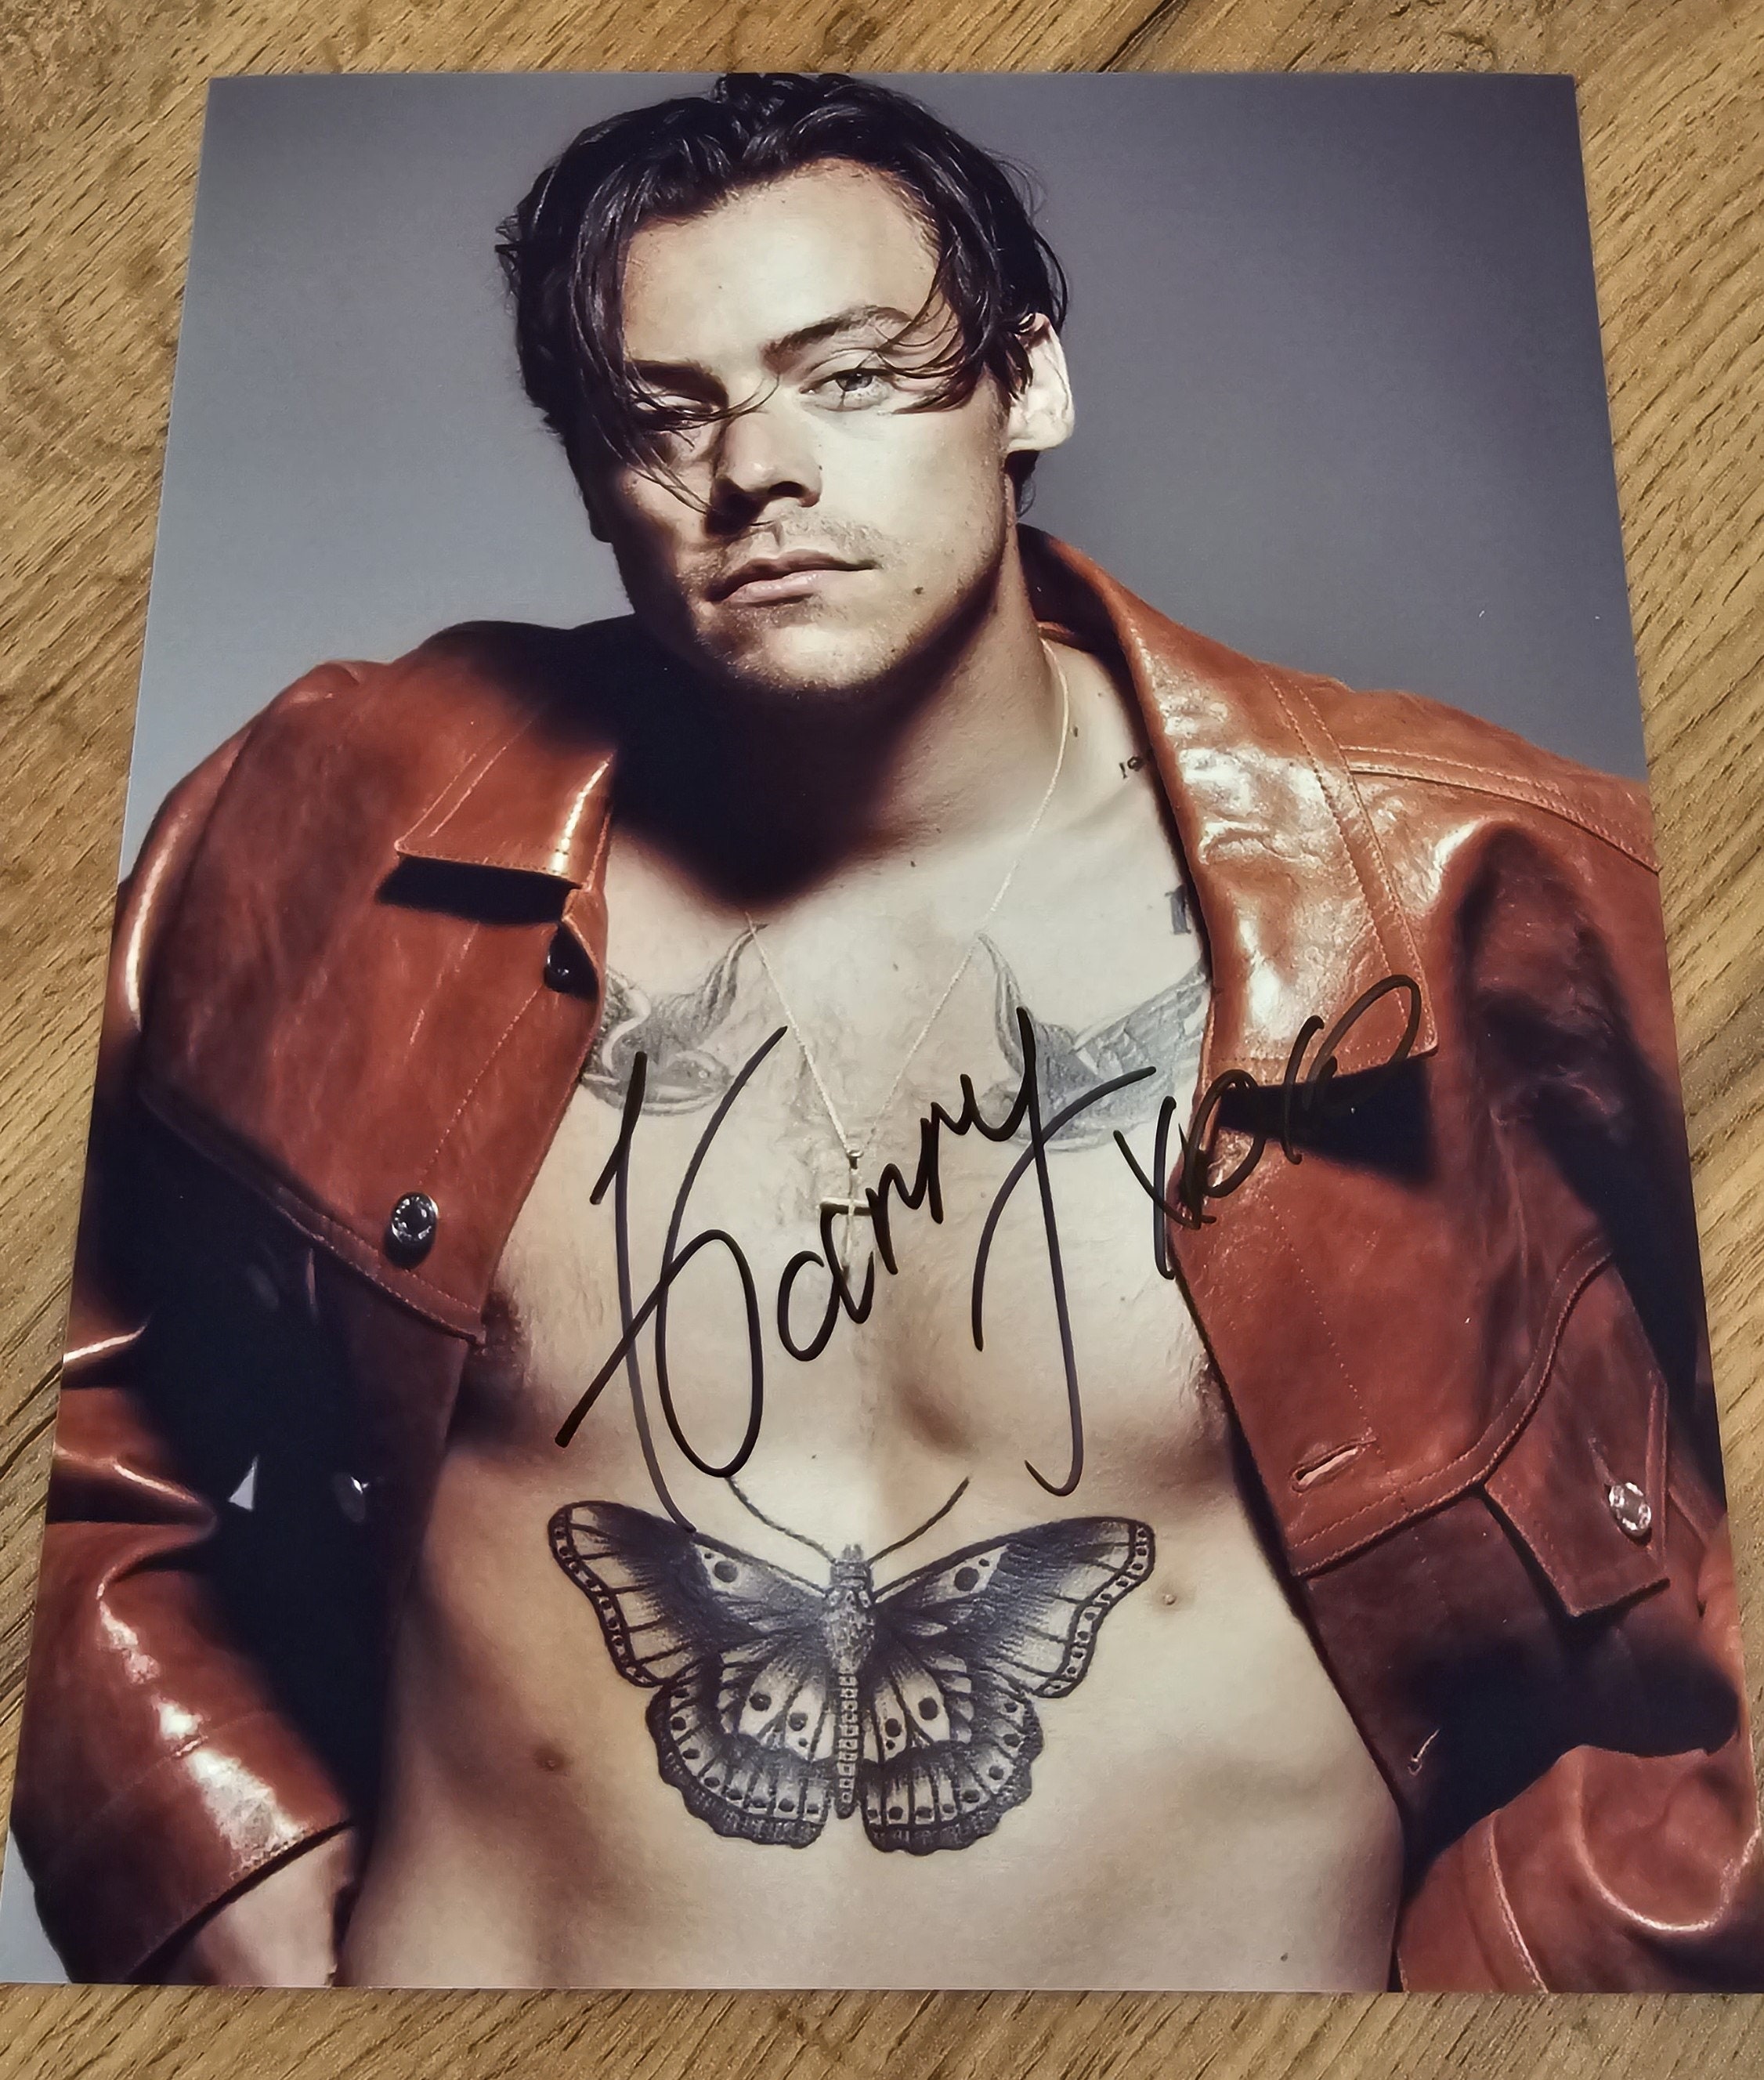 Harry Styles Fine Line Autographed Limited Edition Pinkvinyl Record 